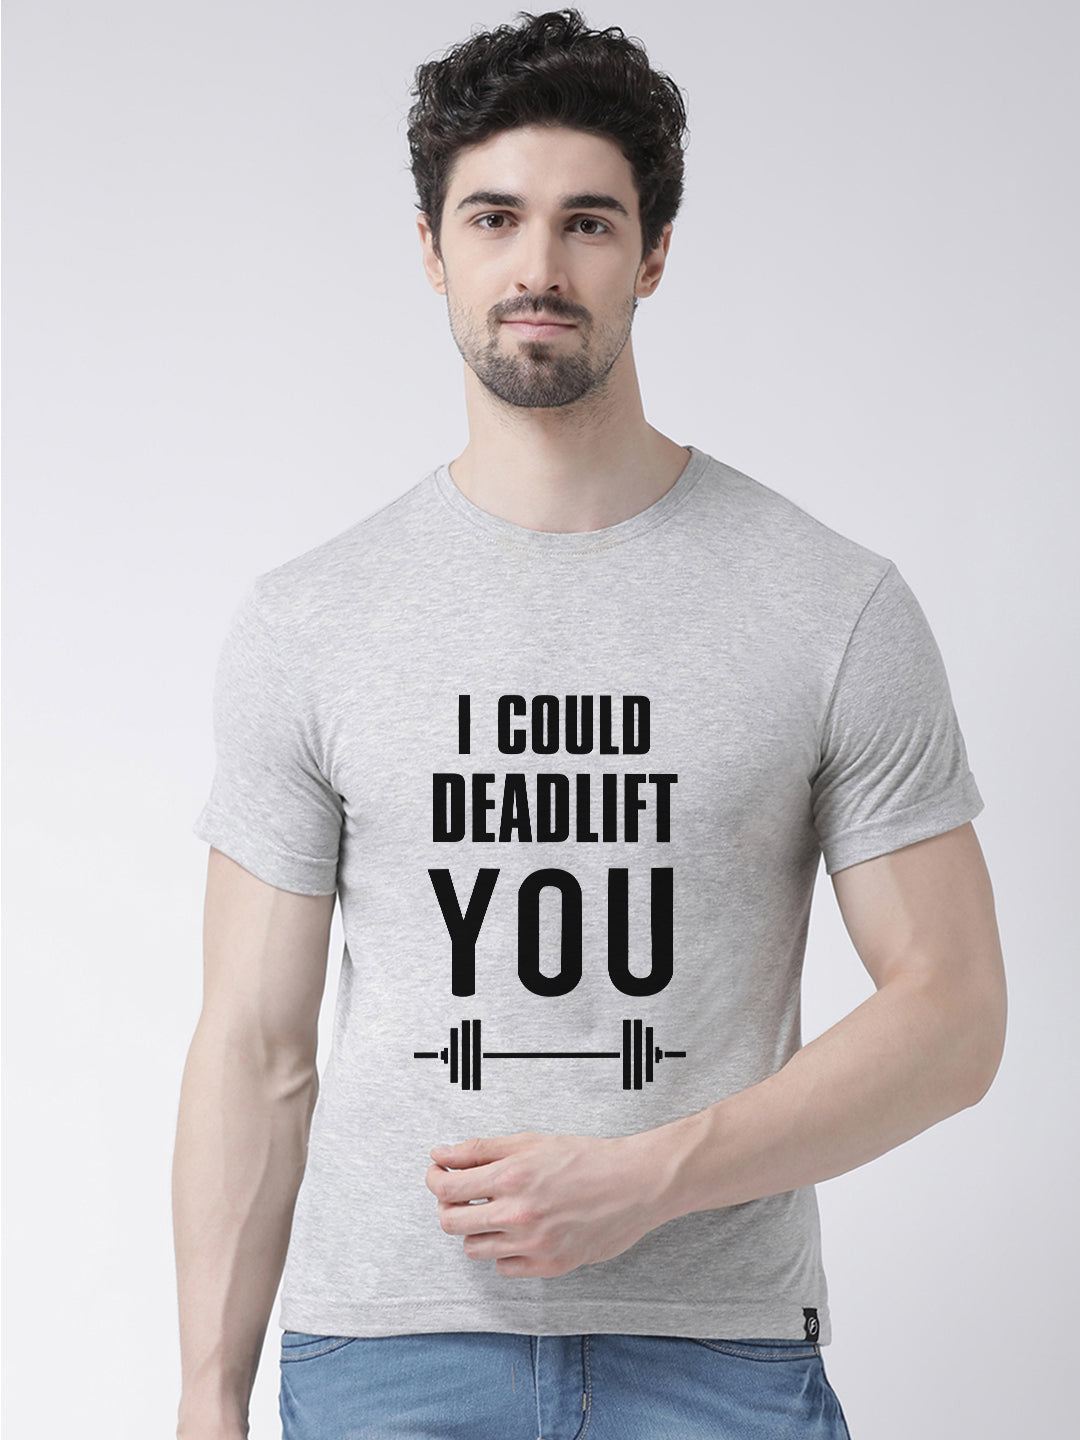 Deadlift Printed Round Neck T-shirt - Friskers